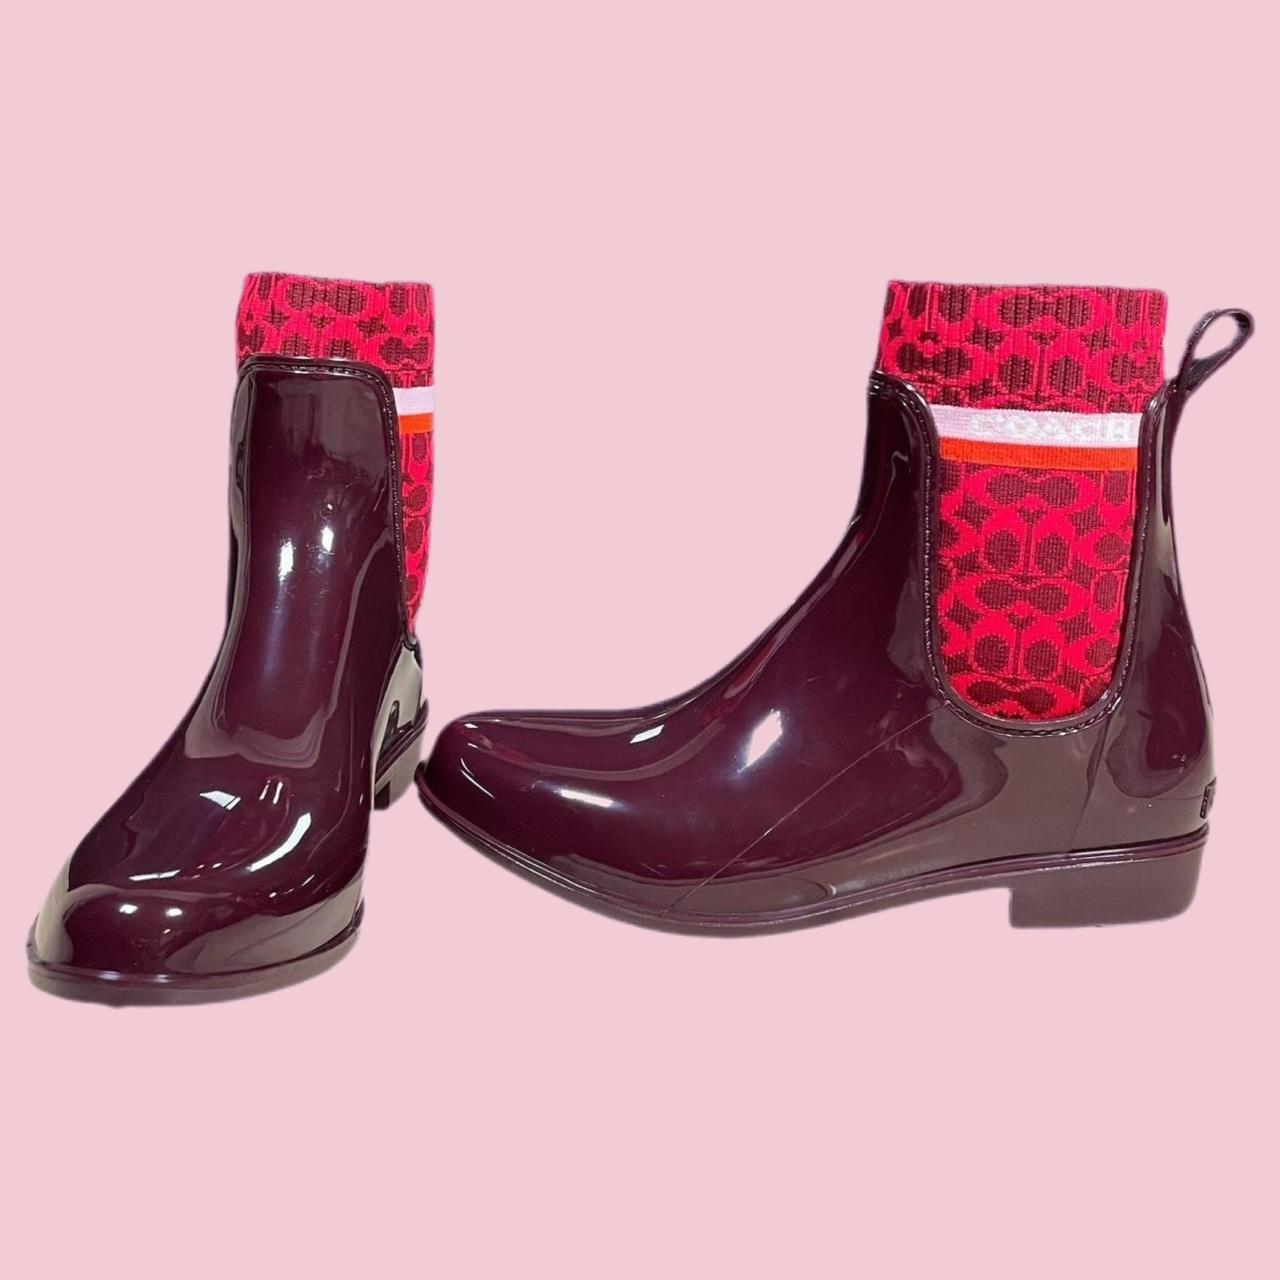 Coach Women's Burgundy and Red Boots